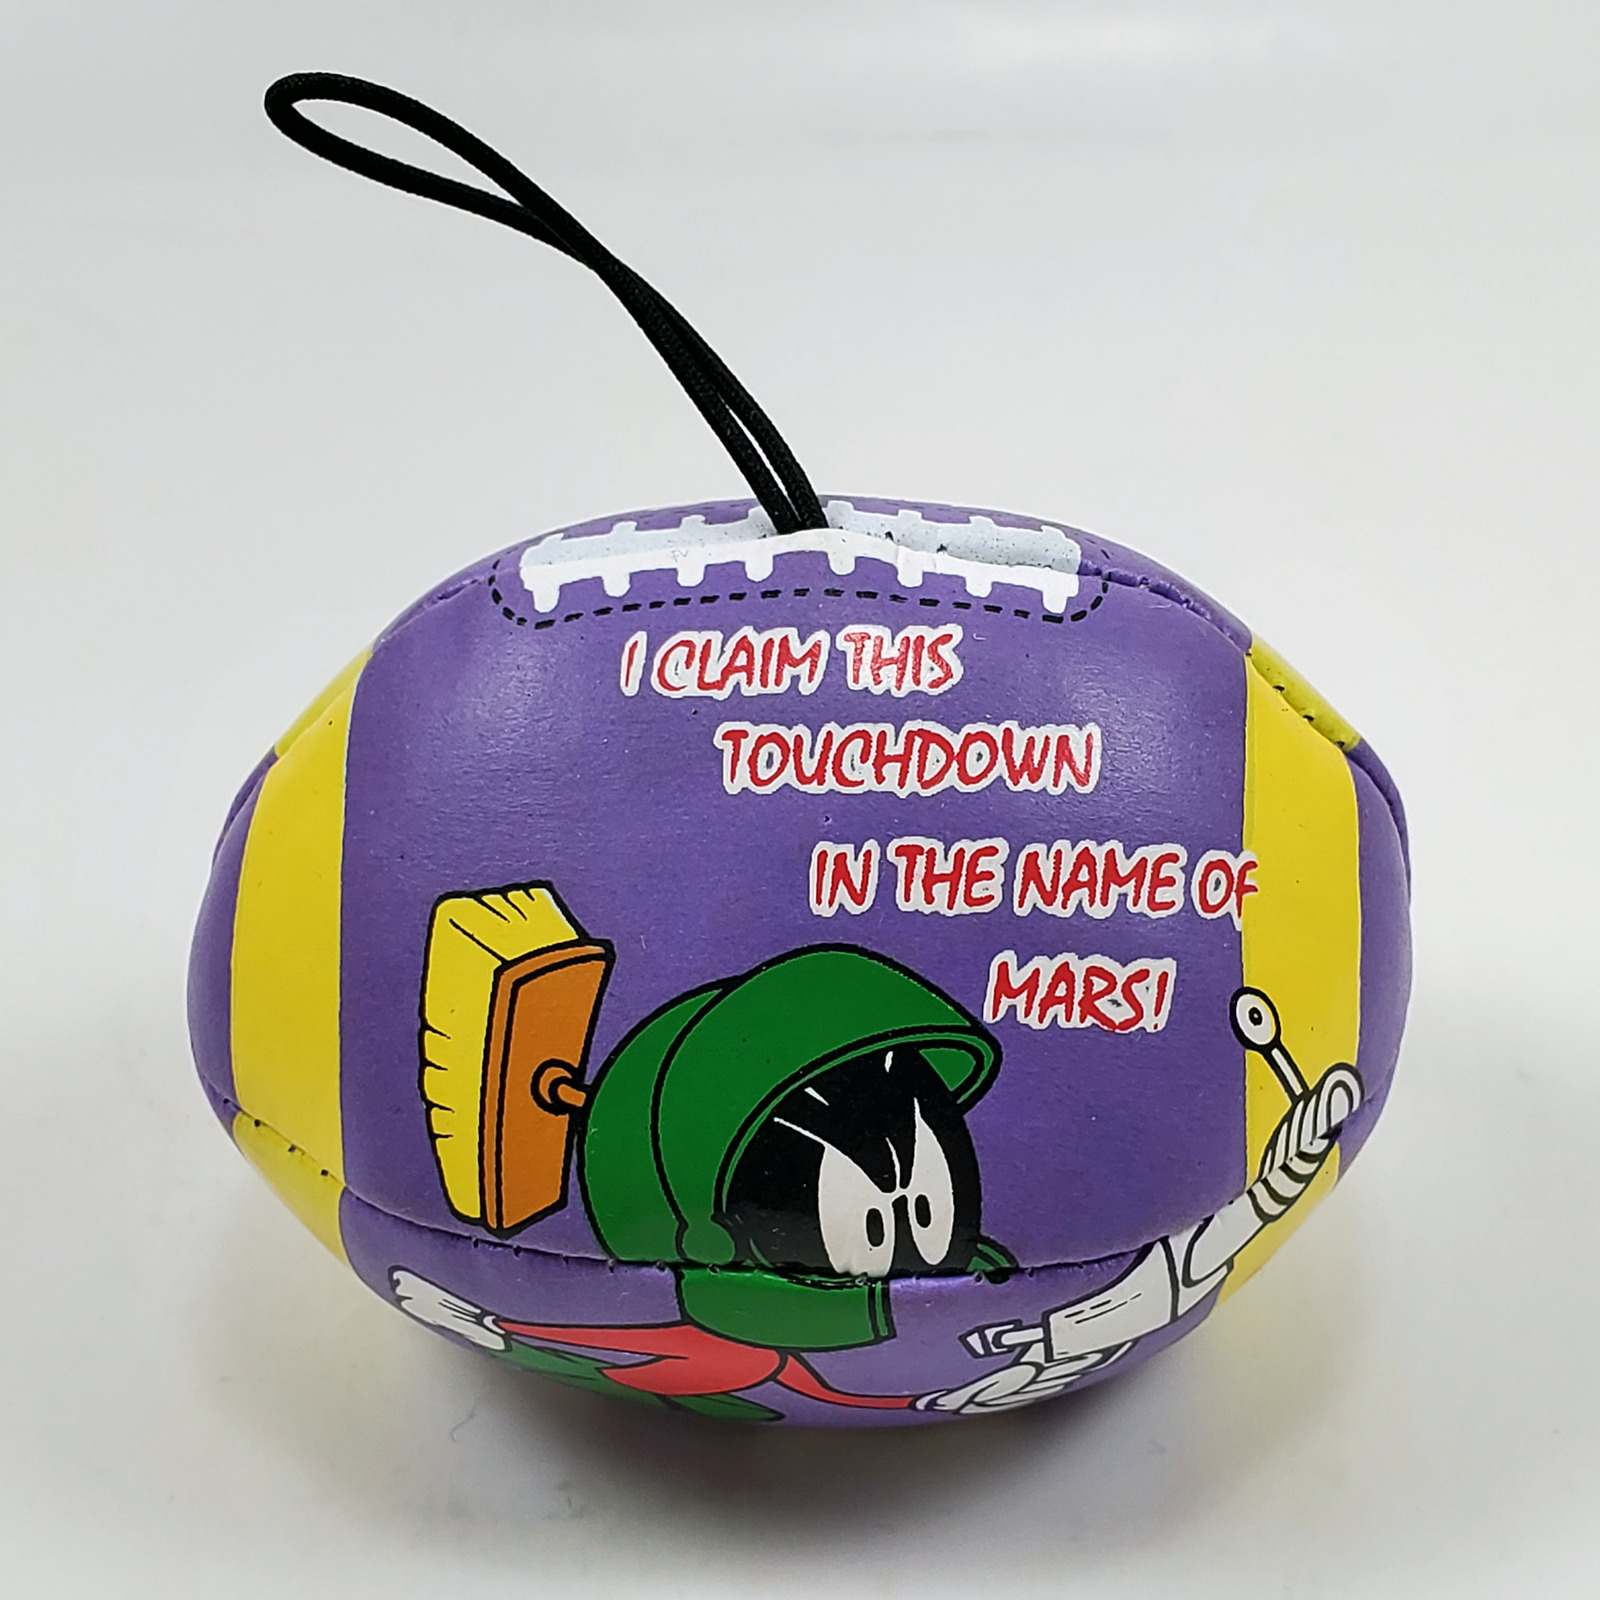 Vintage Marvin the Martian Looney Tunes Small Hacky Sack-Esque Plush Football